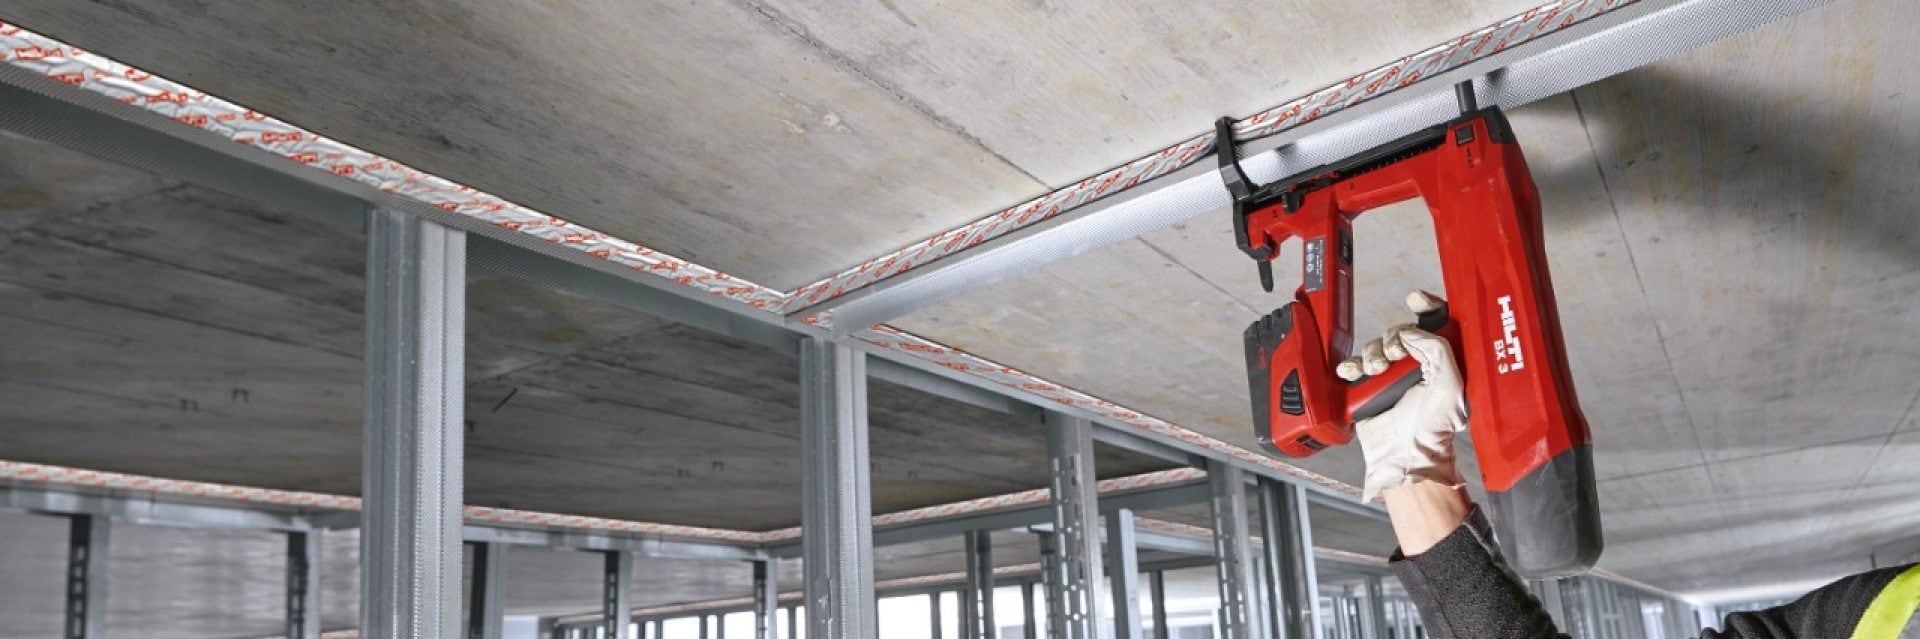 CFS-TTS Firestop top track seal for drywall applications